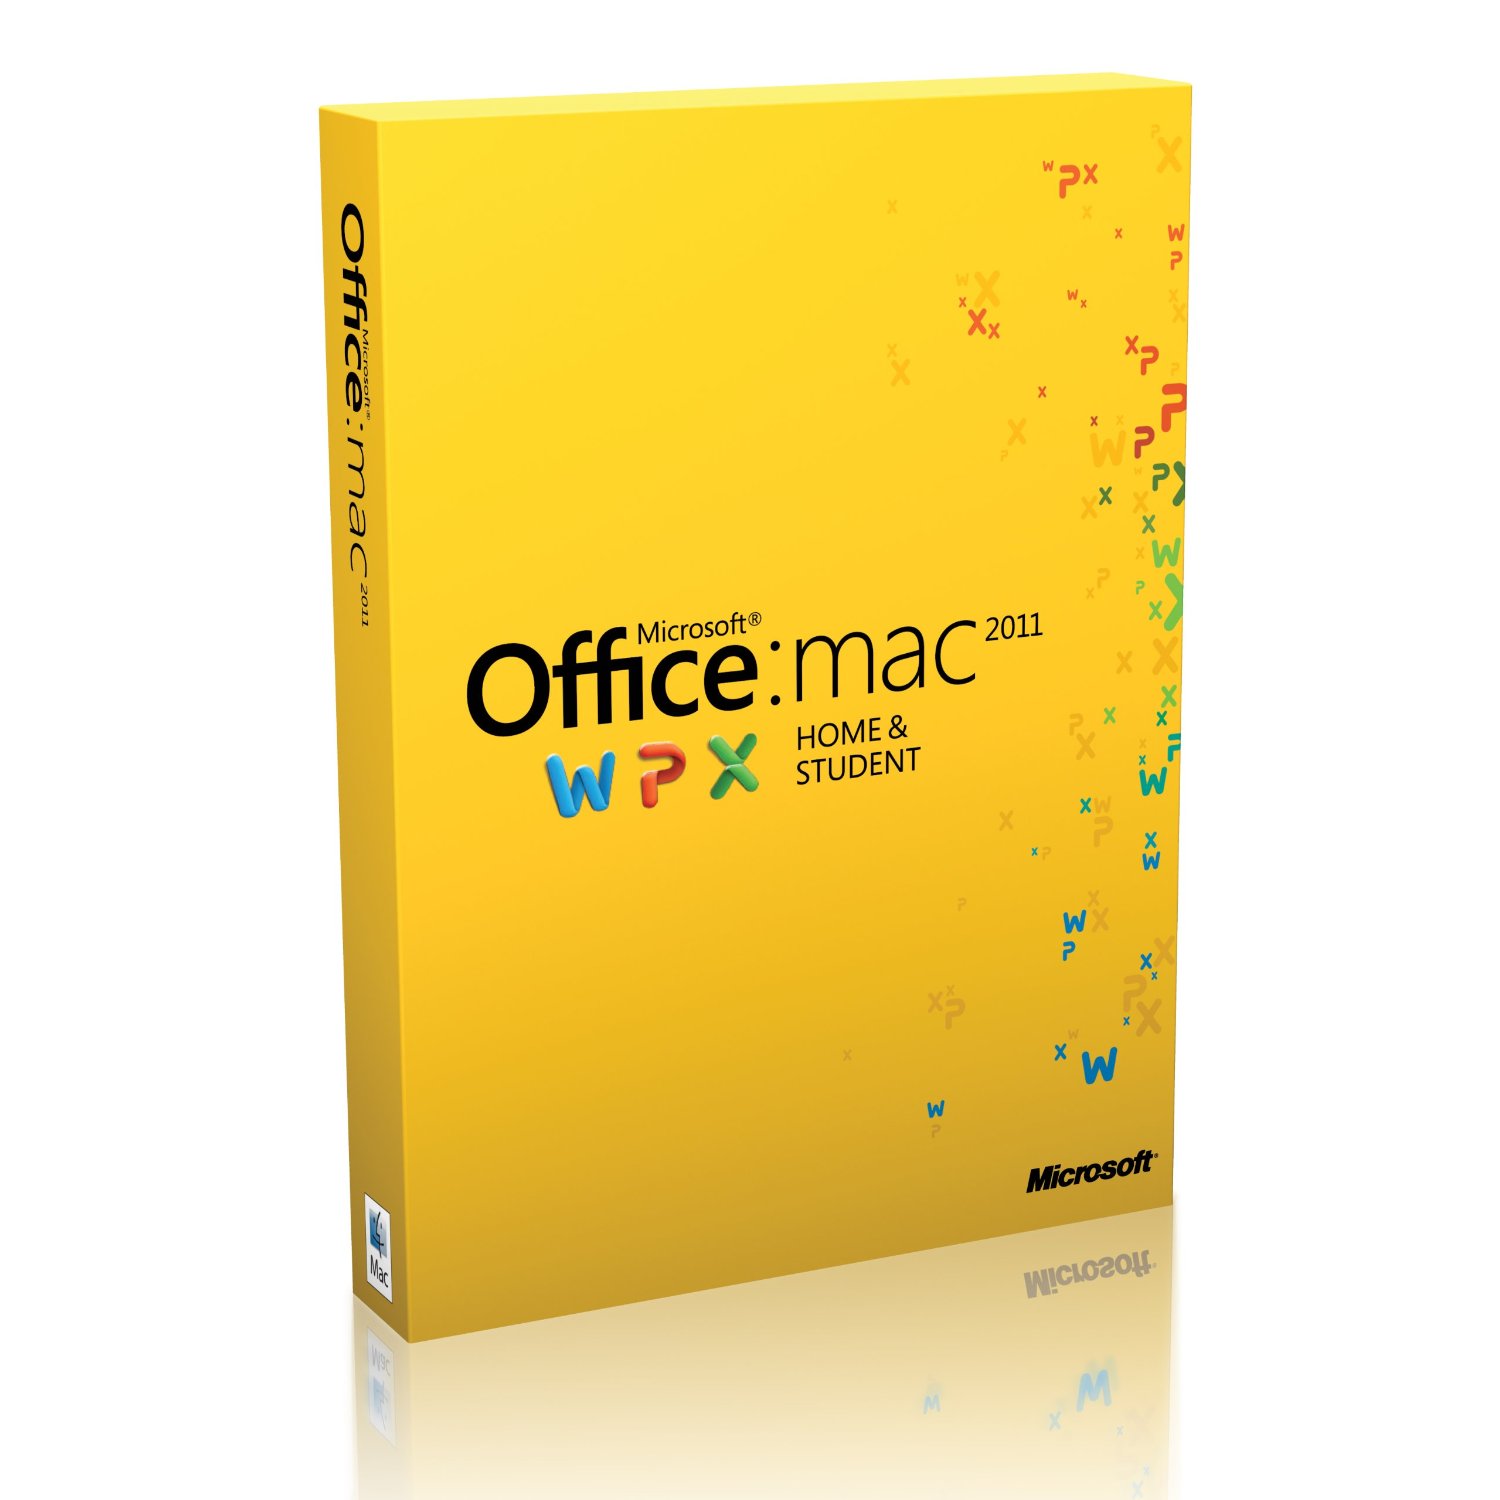 Microsoft office for mac home and student 2011 family pack